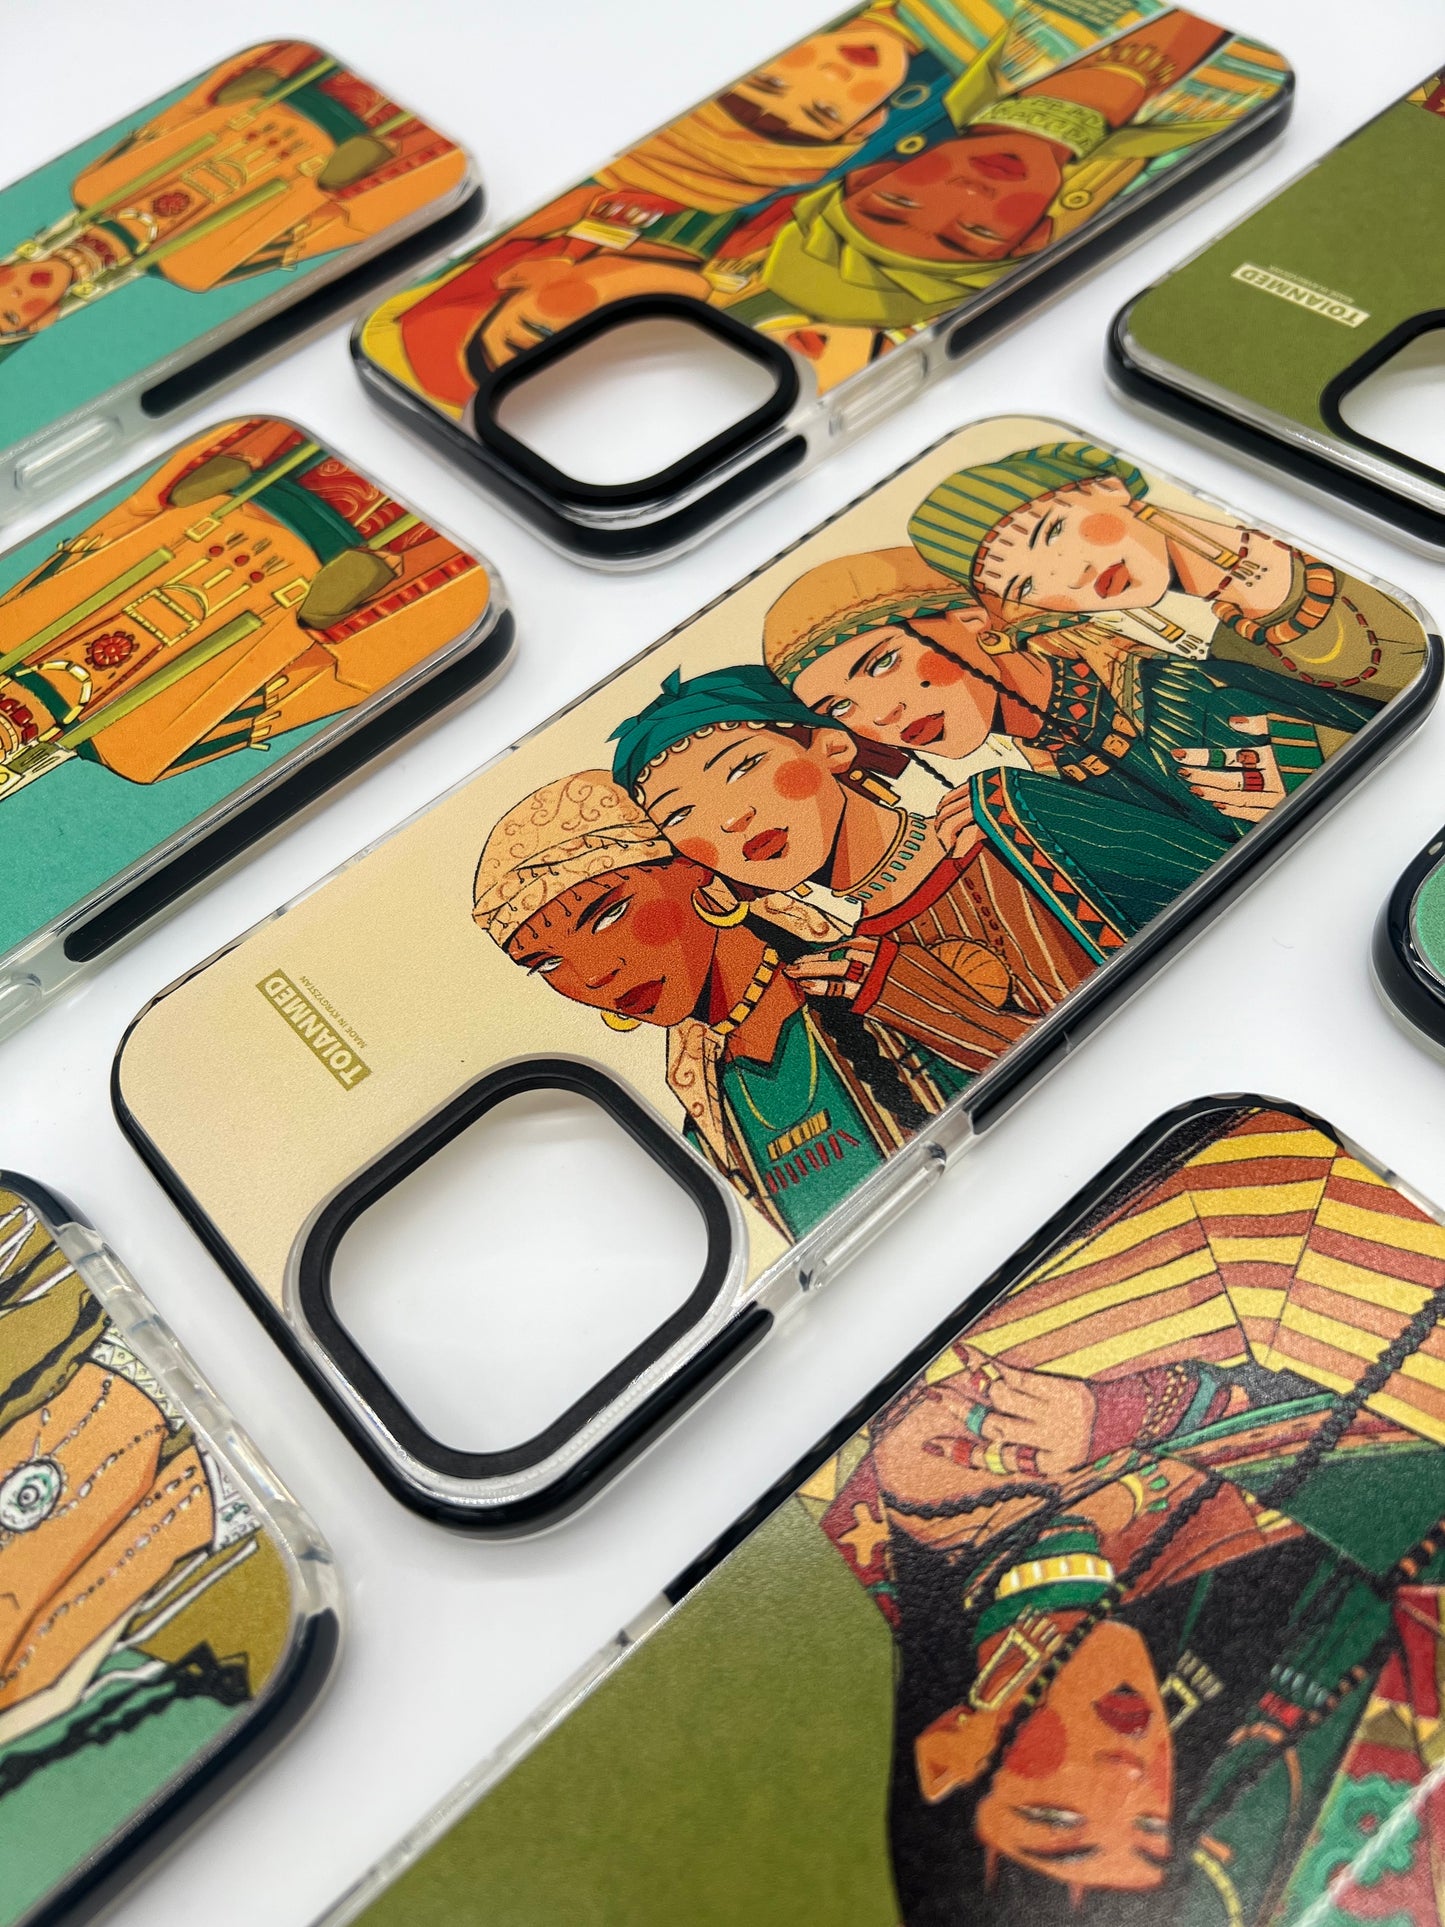 Nomads of Central Asia iPhone Case